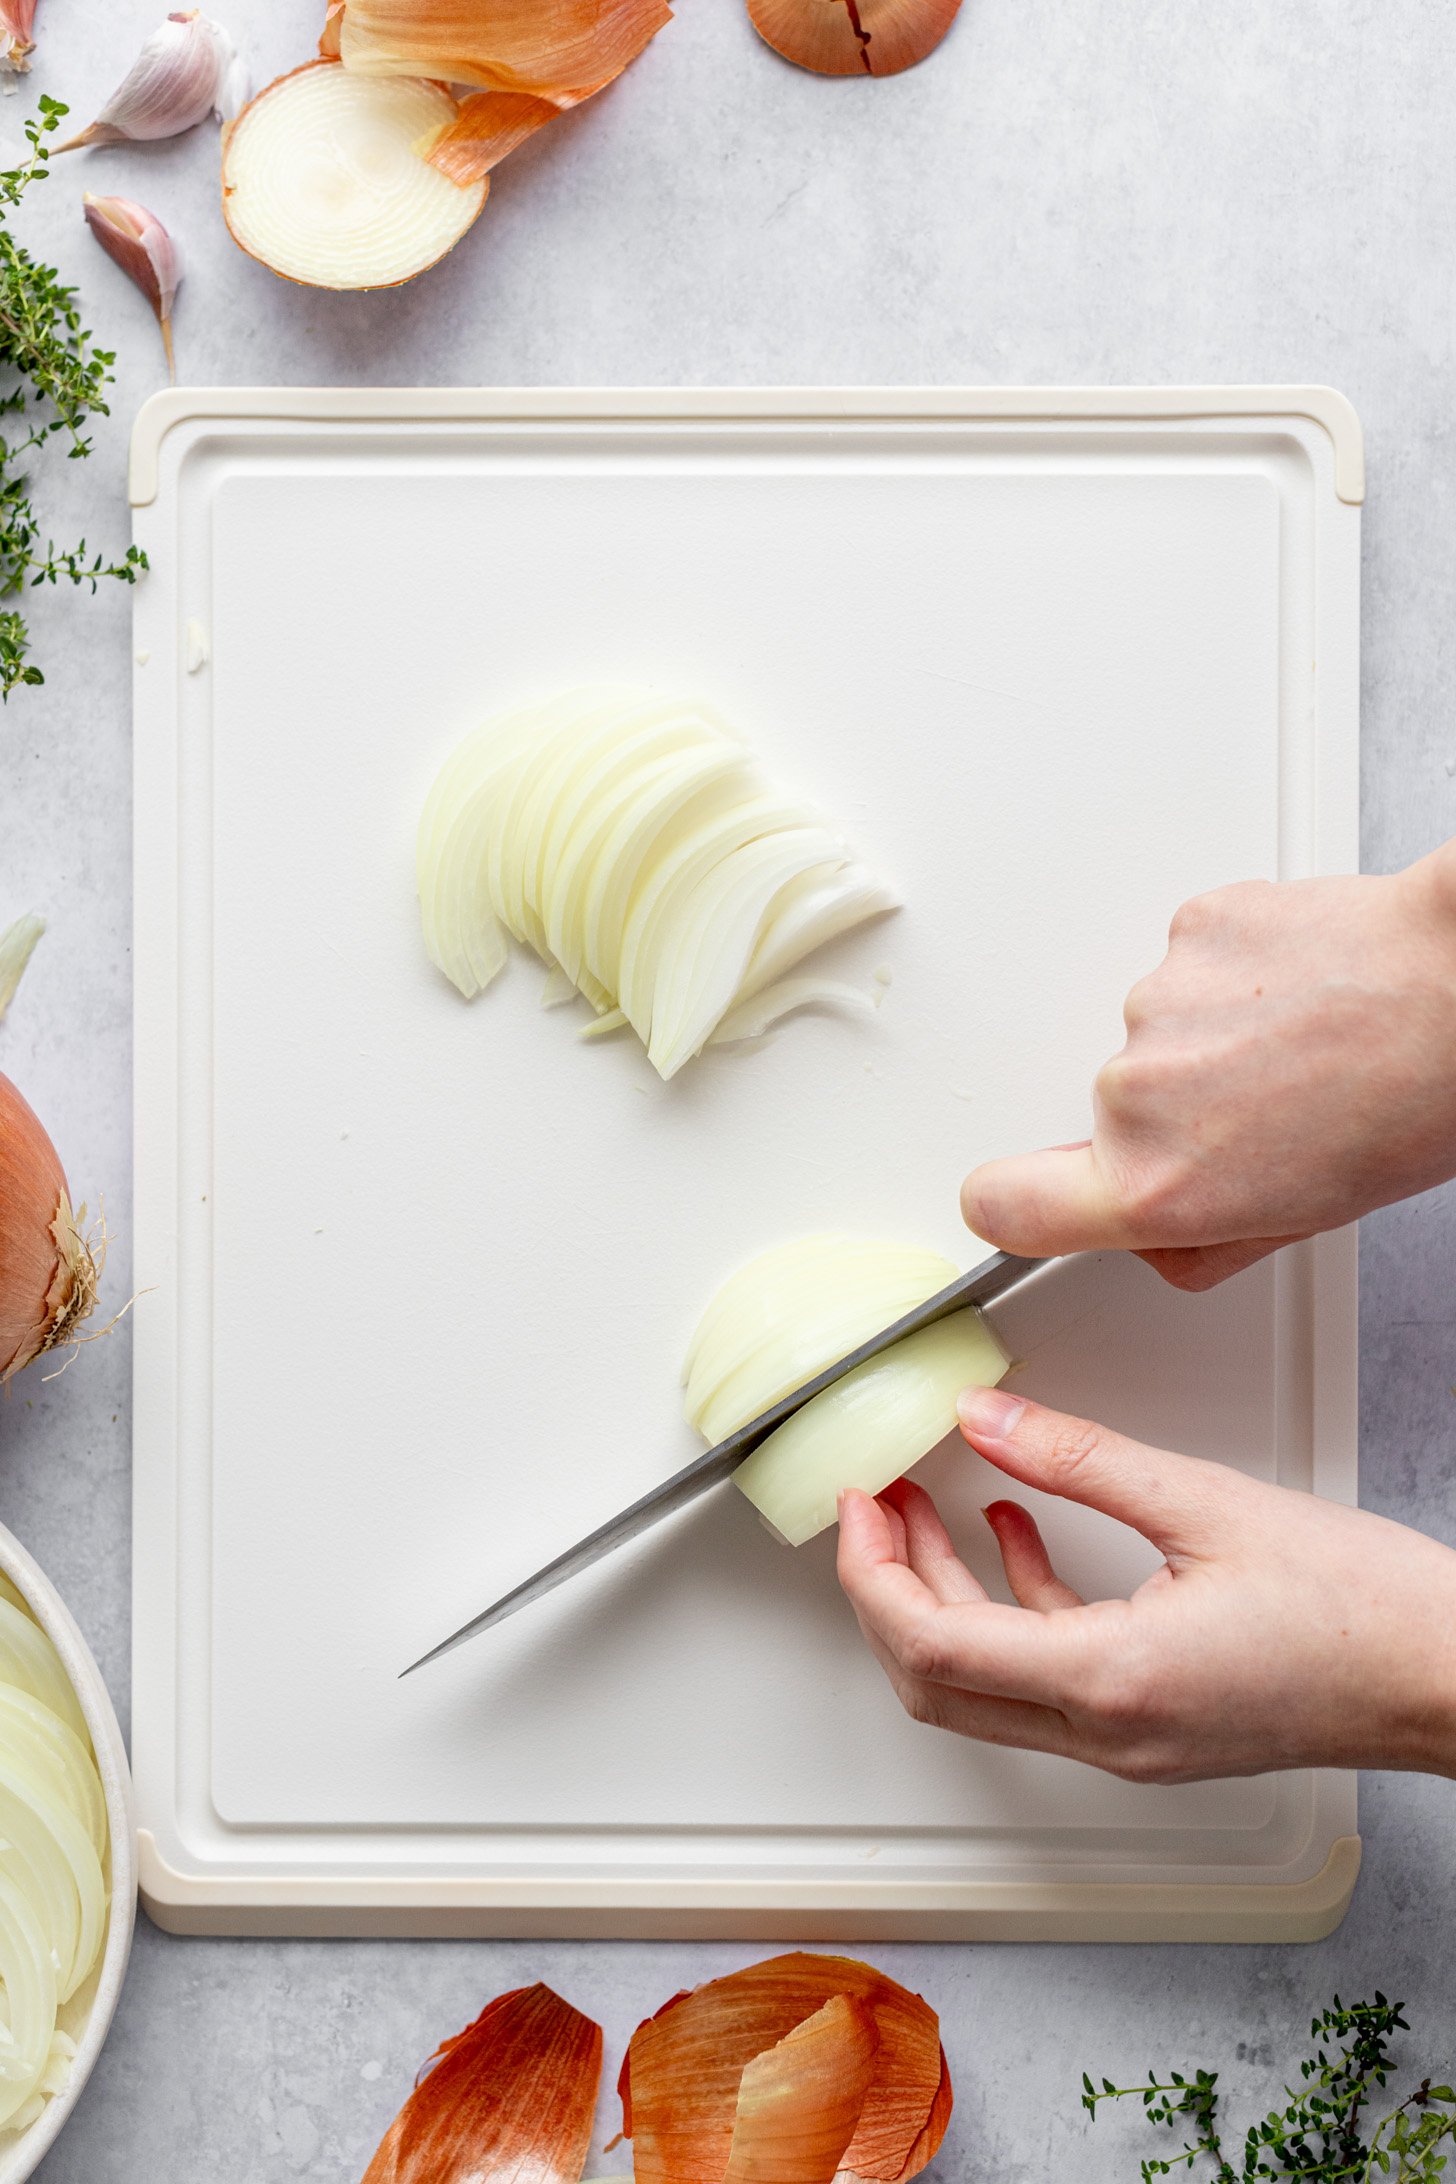 A pair of hands slicing an onion with a knife on a cutting board. The cutting board is on a countertop surrounded by onion peels, discarded pieces of onion, some garlic cloves and some fresh herbs.